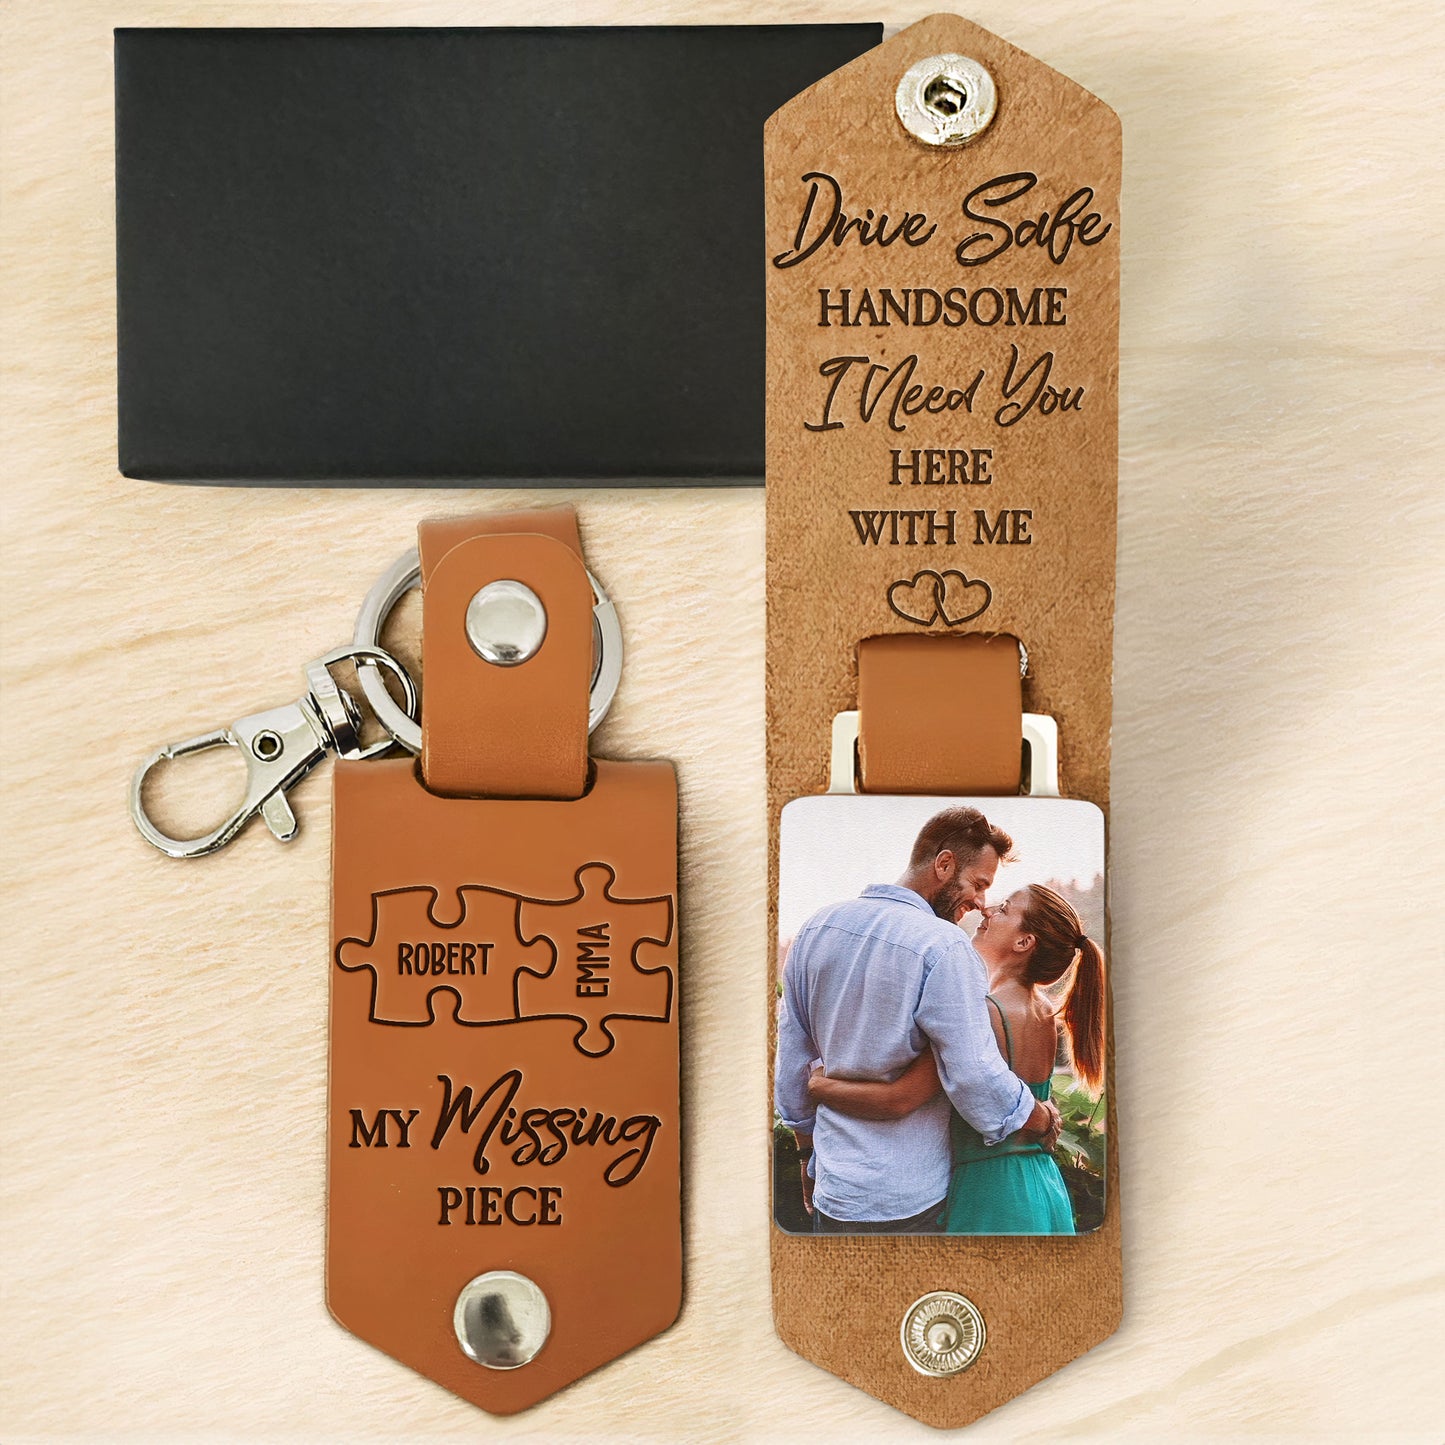 My Missing Piece Drive Safe I Need You - Personalized Leather Photo Keychain